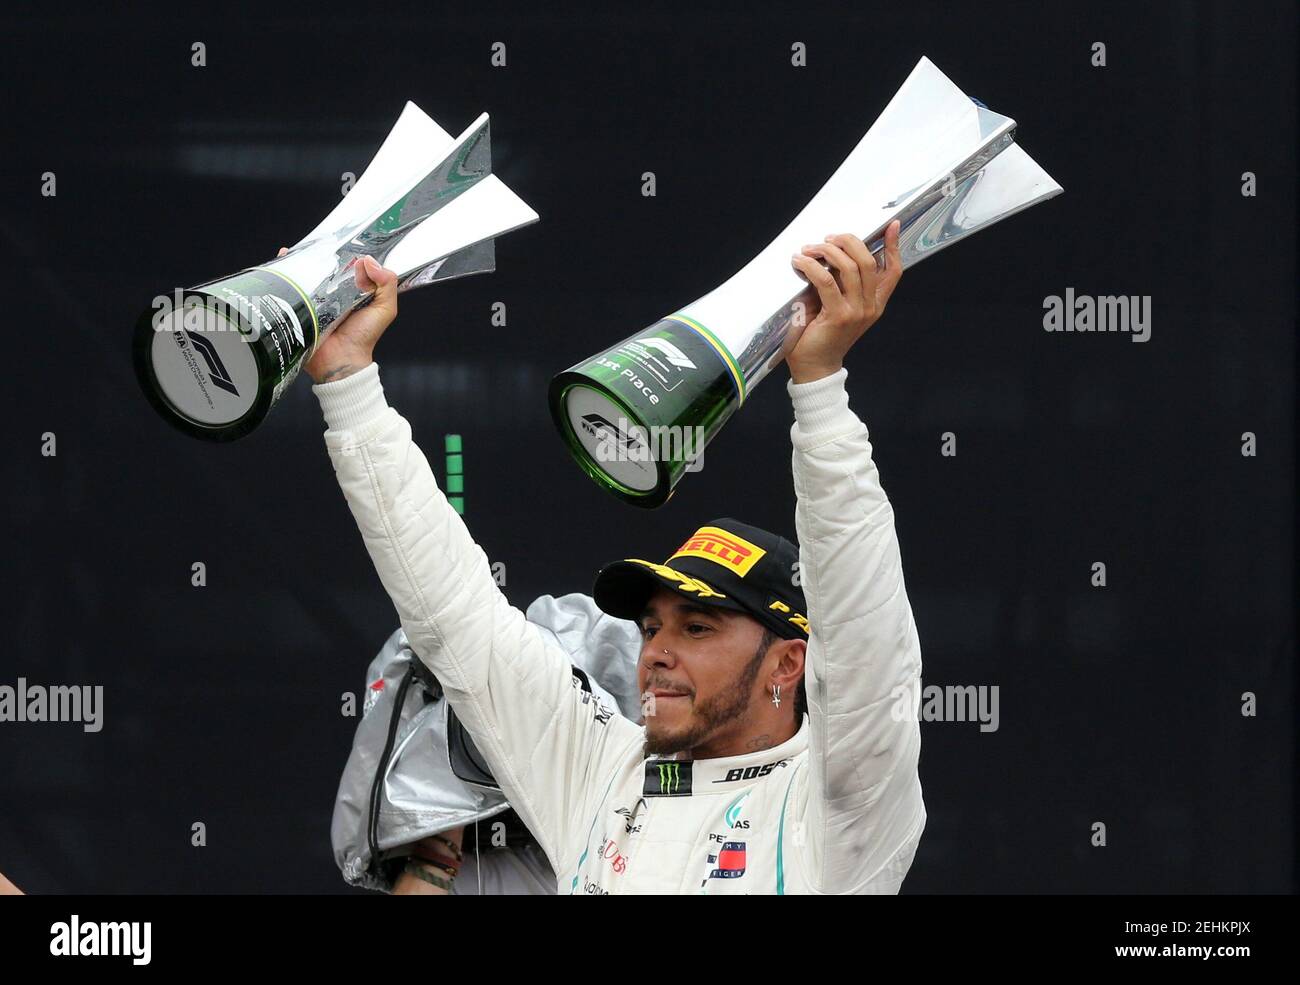 Formula One F1 - Brazilian Grand Prix - Autodromo Jose Carlos Pace, Interlagos, Sao Paulo, Brazil - November 11, 2018  Mercedes' Lewis Hamilton celebrates after winning the race with the constructors championship trophy and the race trophy  REUTERS/Paulo Whitaker Stock Photo